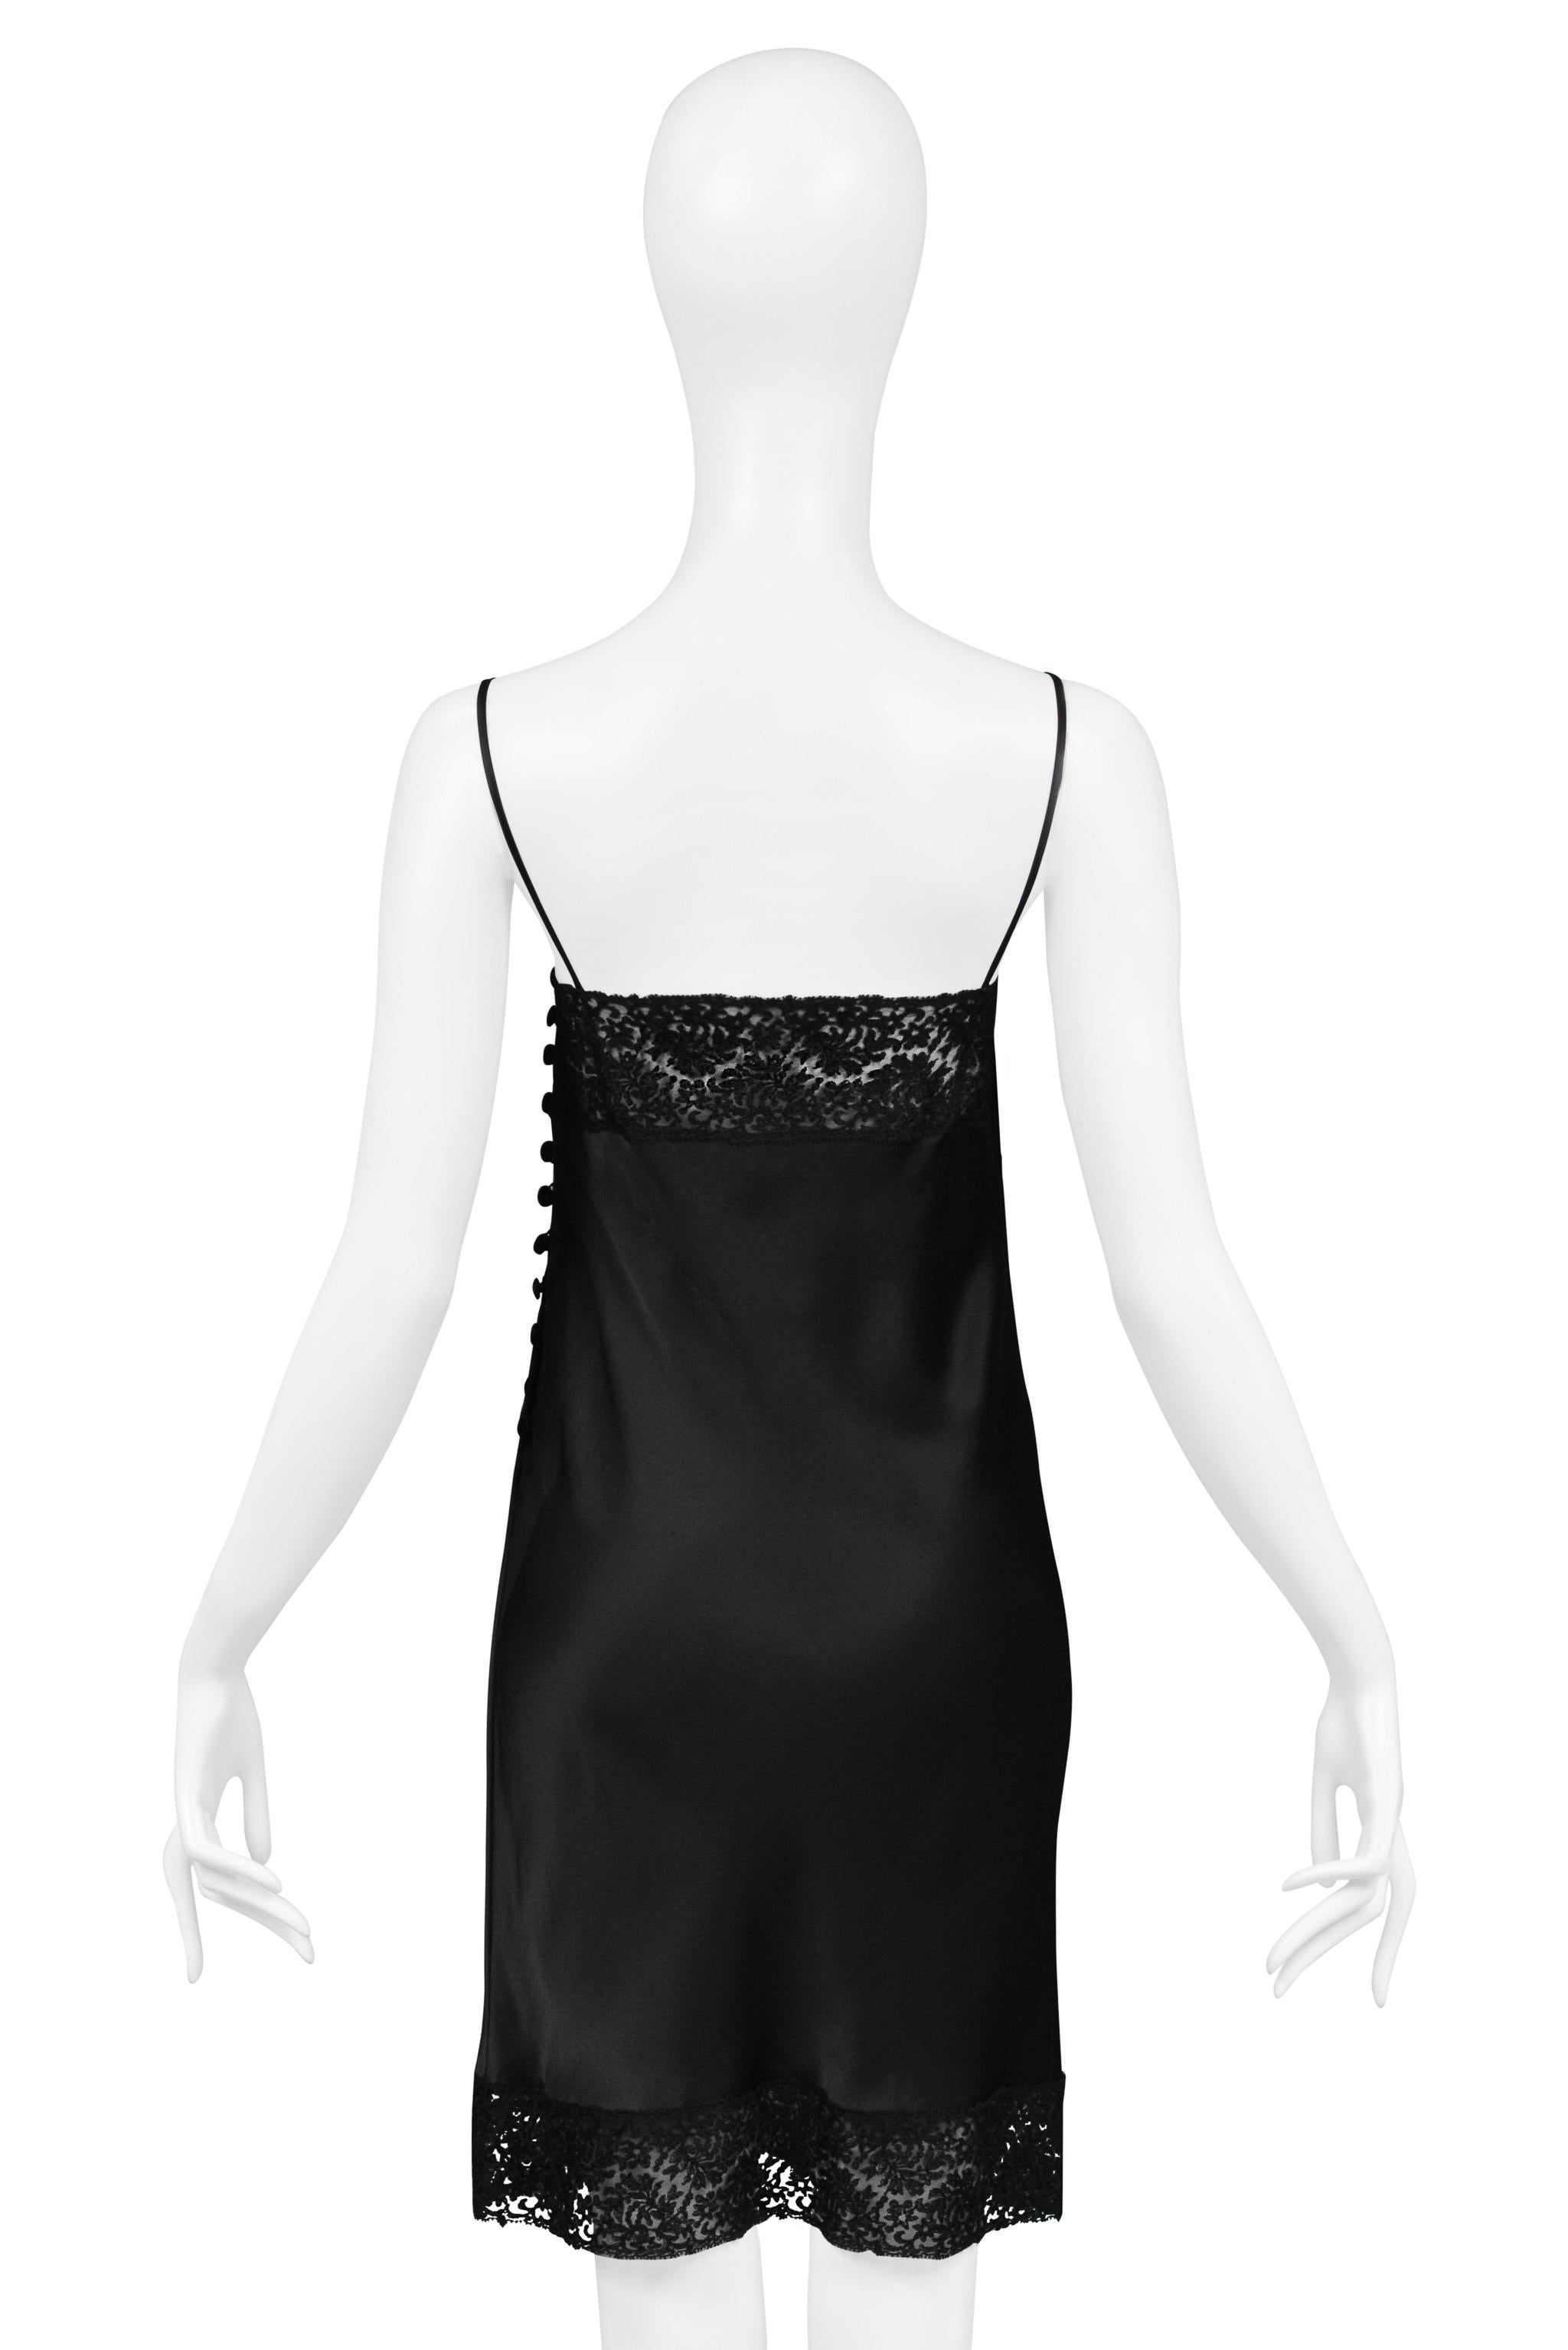 Christian Dior By John Galliano Black Silk And Lace Slip Dress 1997 For Sale 6